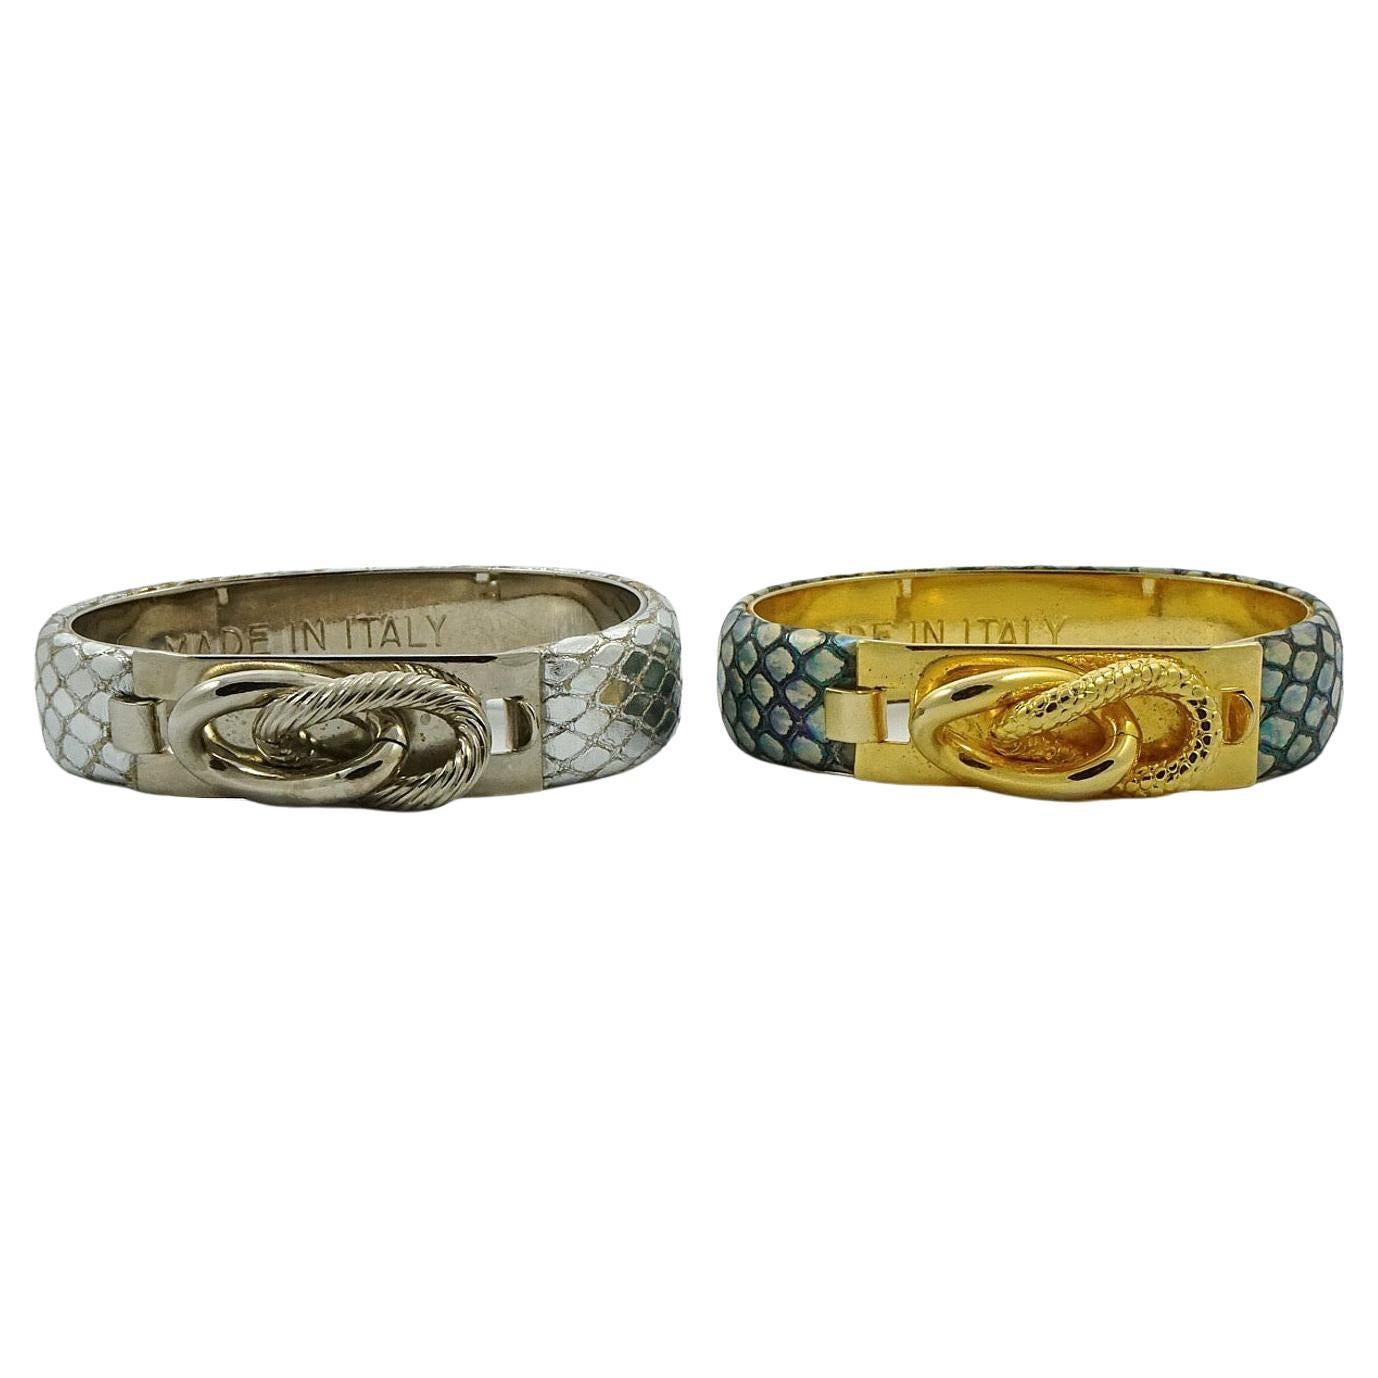 Pair of Silver and Grey Leather Lizard Design Bangle Bracelets Made in Italy For Sale